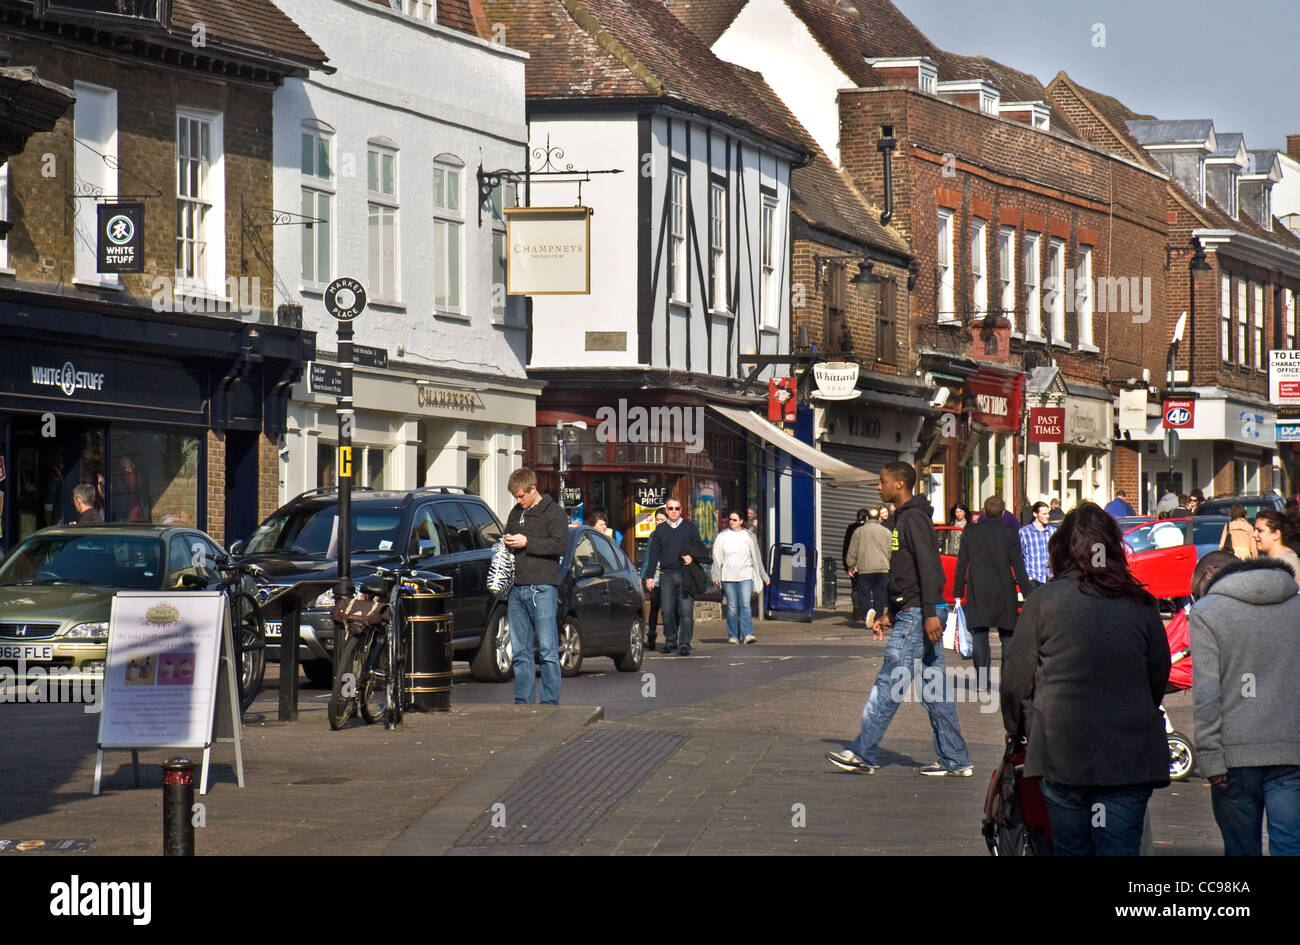 Shops and people in Market Place/ High street, St Albans, Hertfordshire, England, UK Stock Photo